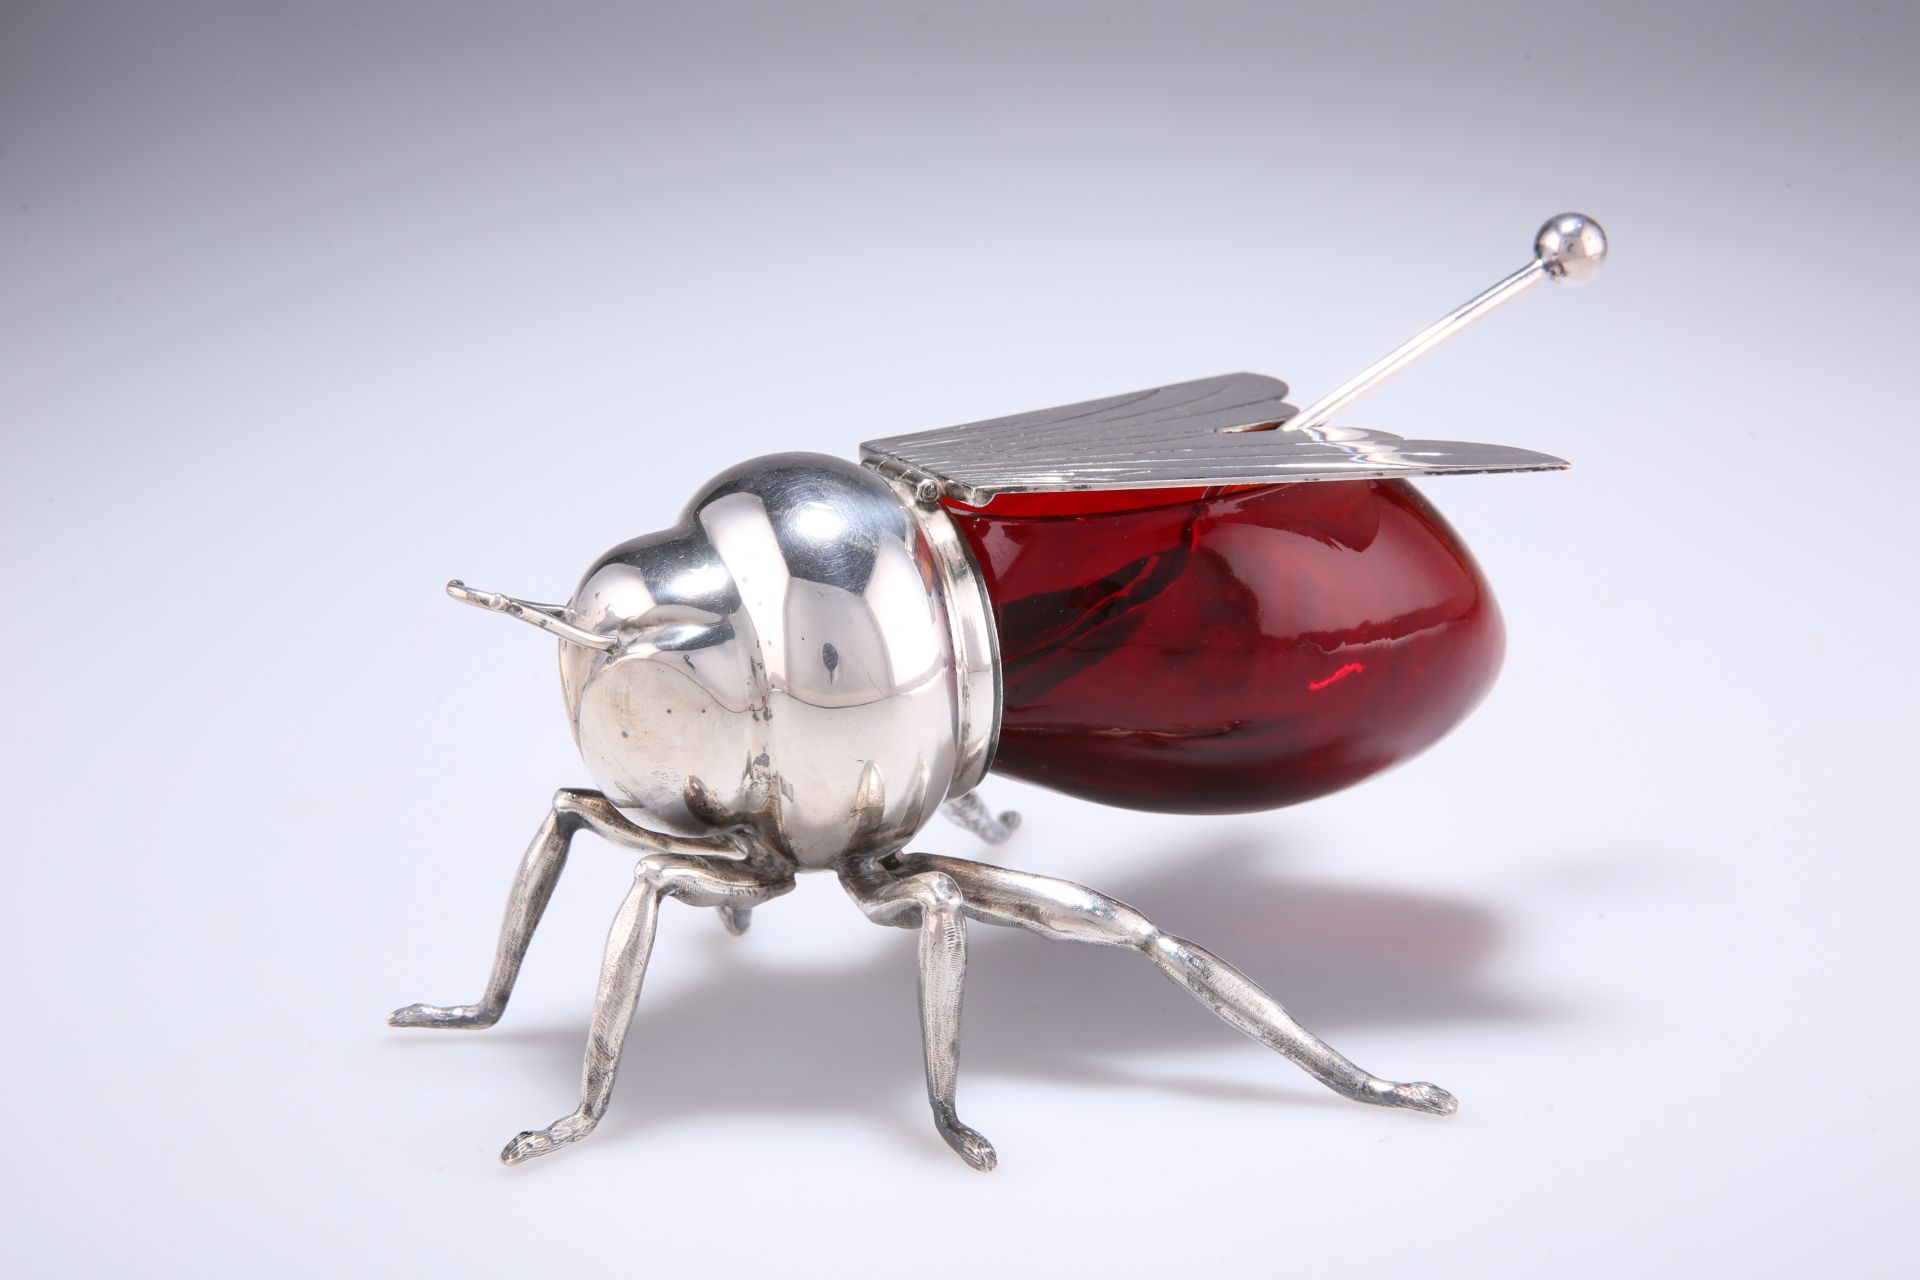 AN EARLY 20TH CENTURY SILVER-PLATED AND CRANBERRY GLASS PRESERVE POT, by Mappin & Webb, in the